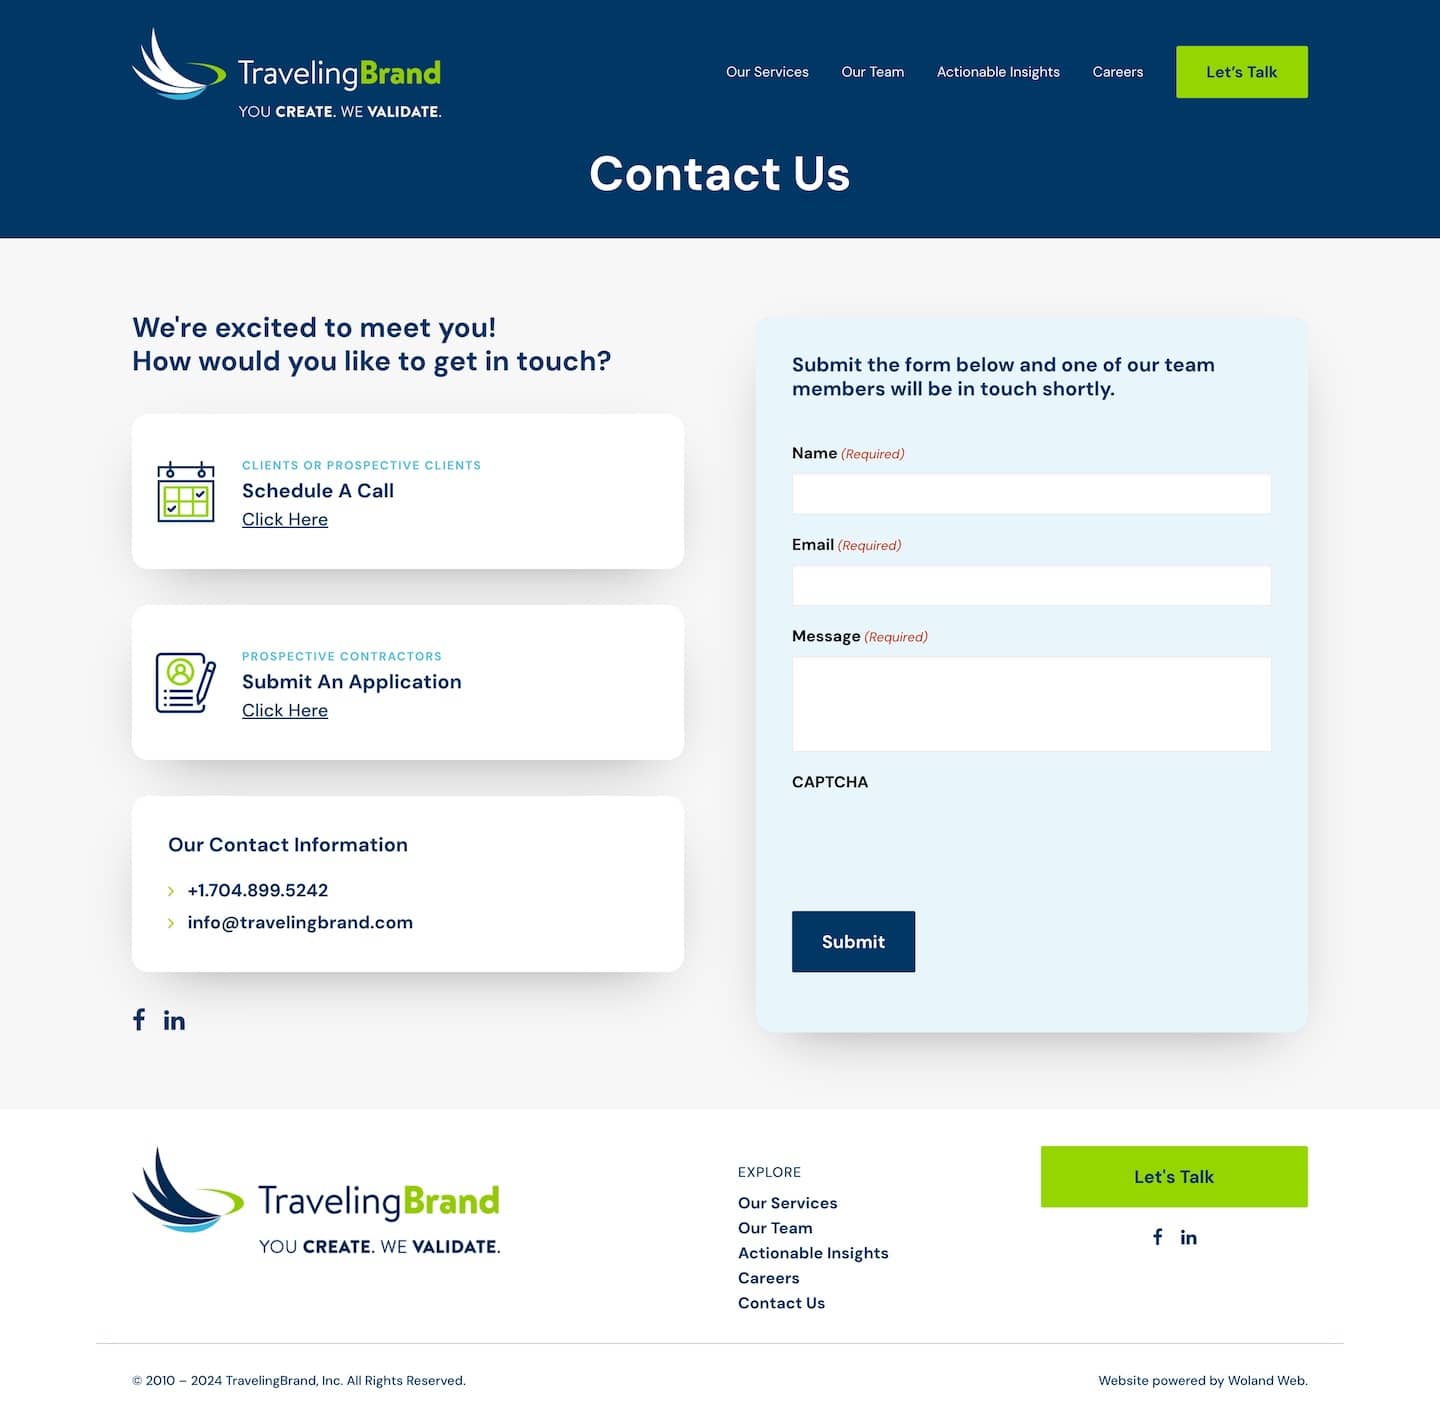 Traveling Brand website contact page